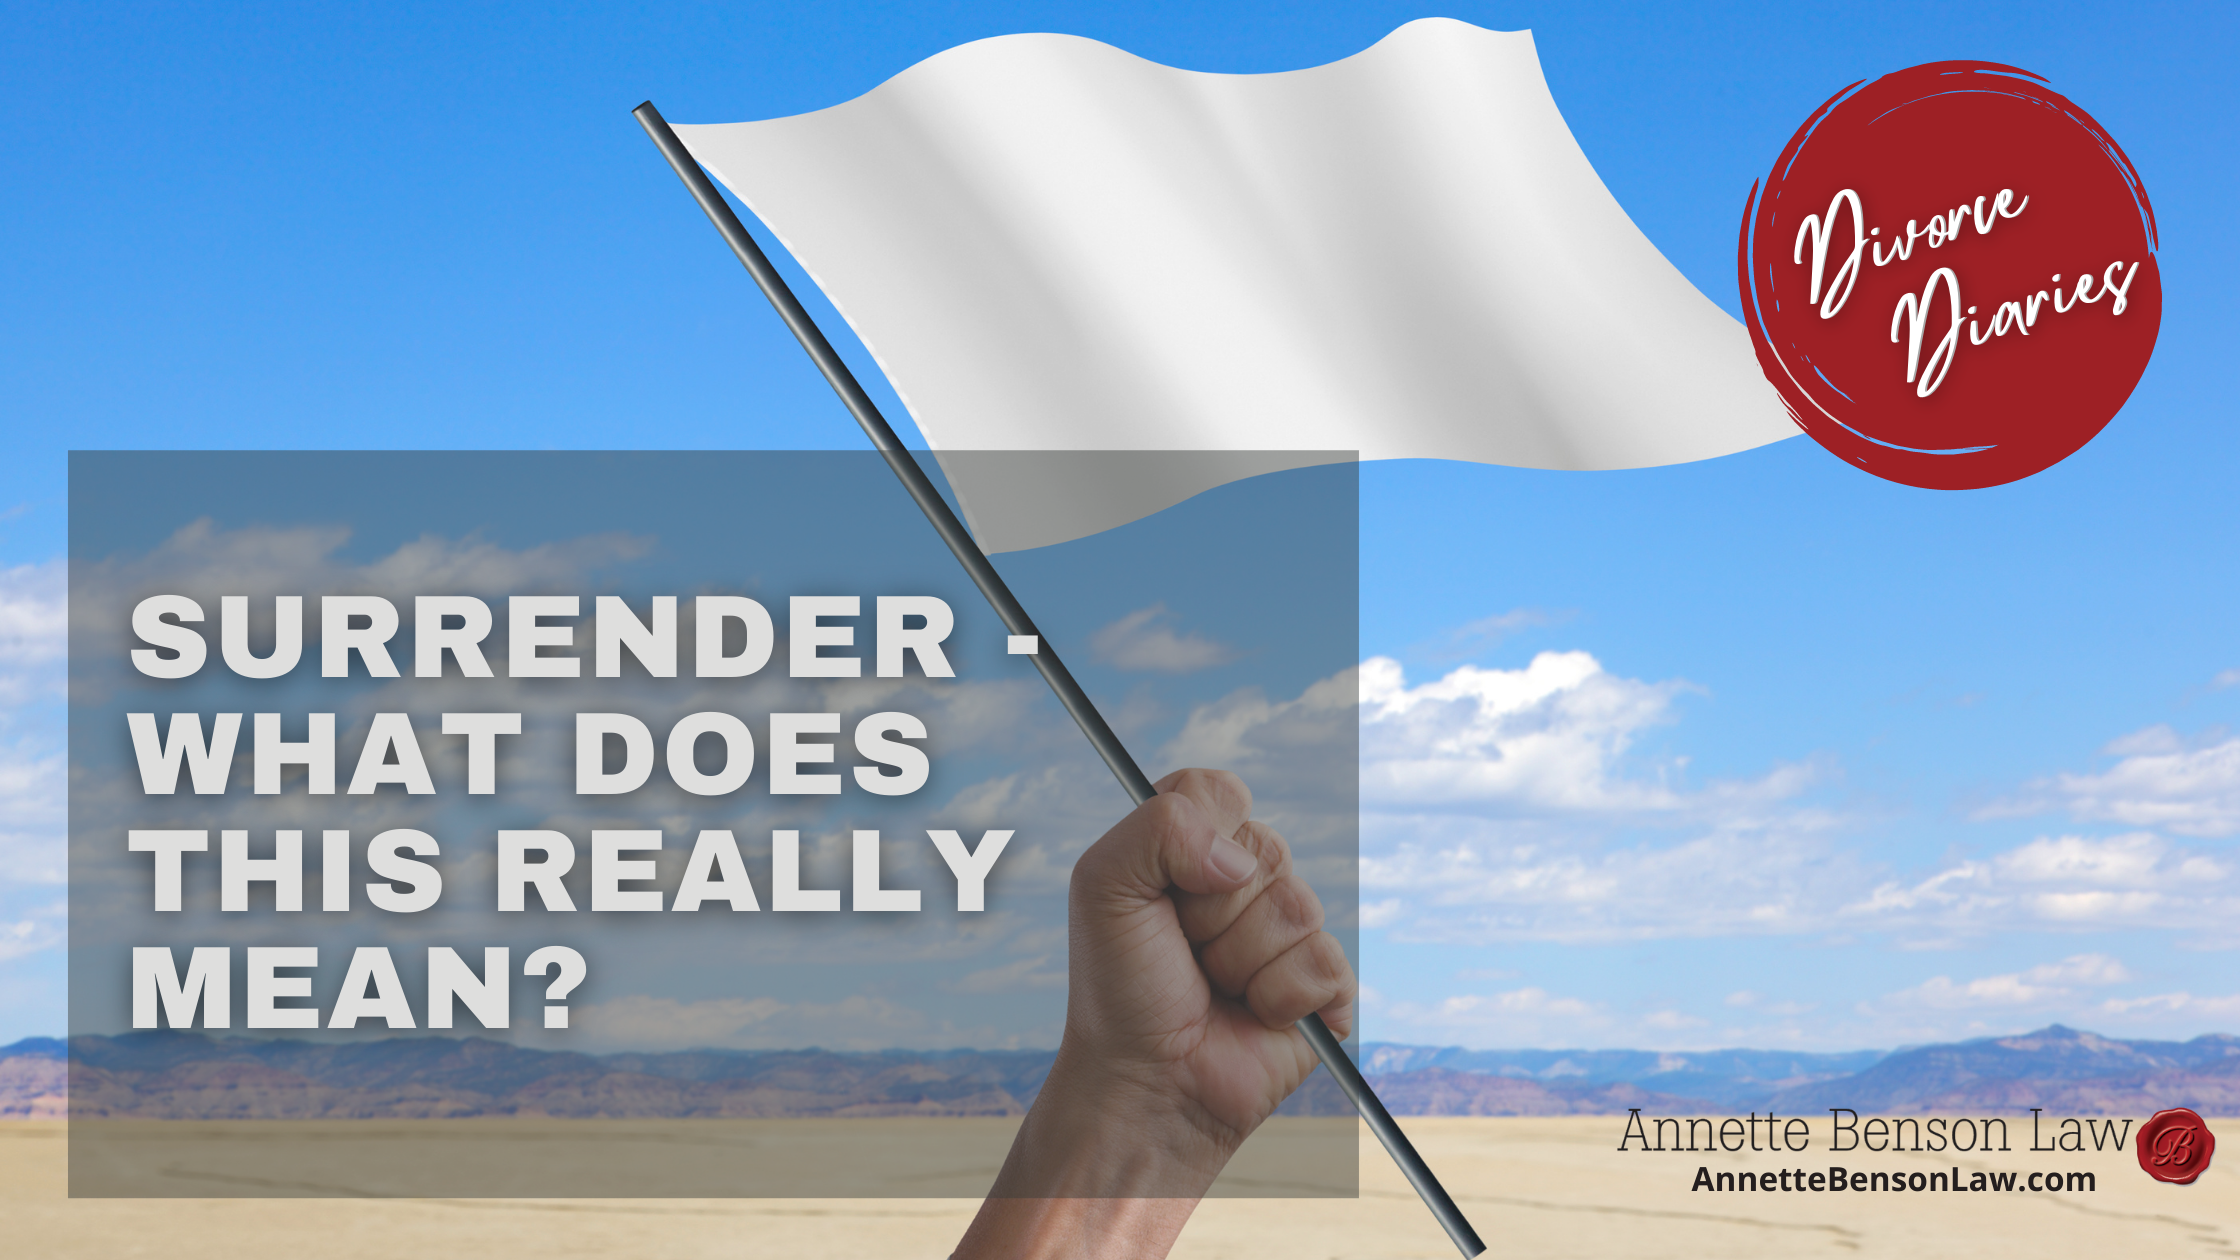 Surrender - What does this really mean?